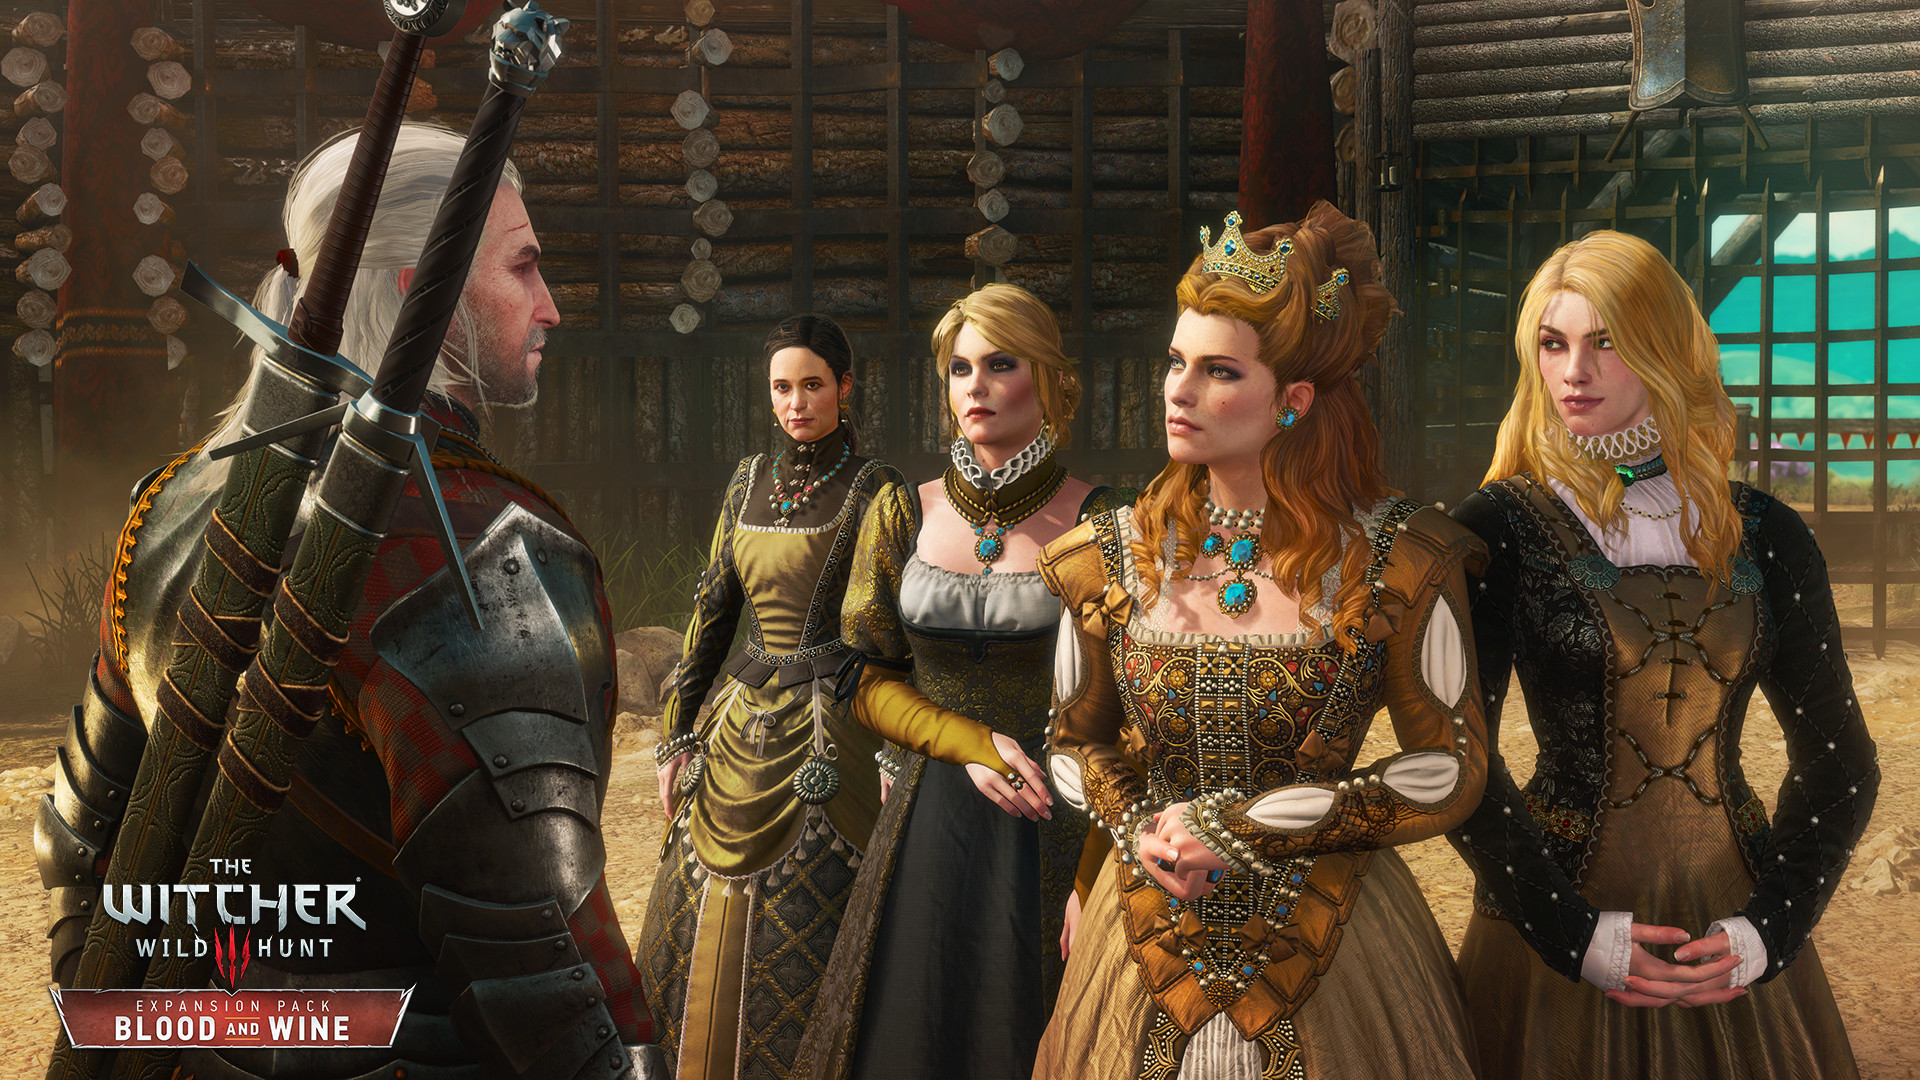 Download The Witcher 3: Wild Hunt - Blood and Wine Full PC Game
